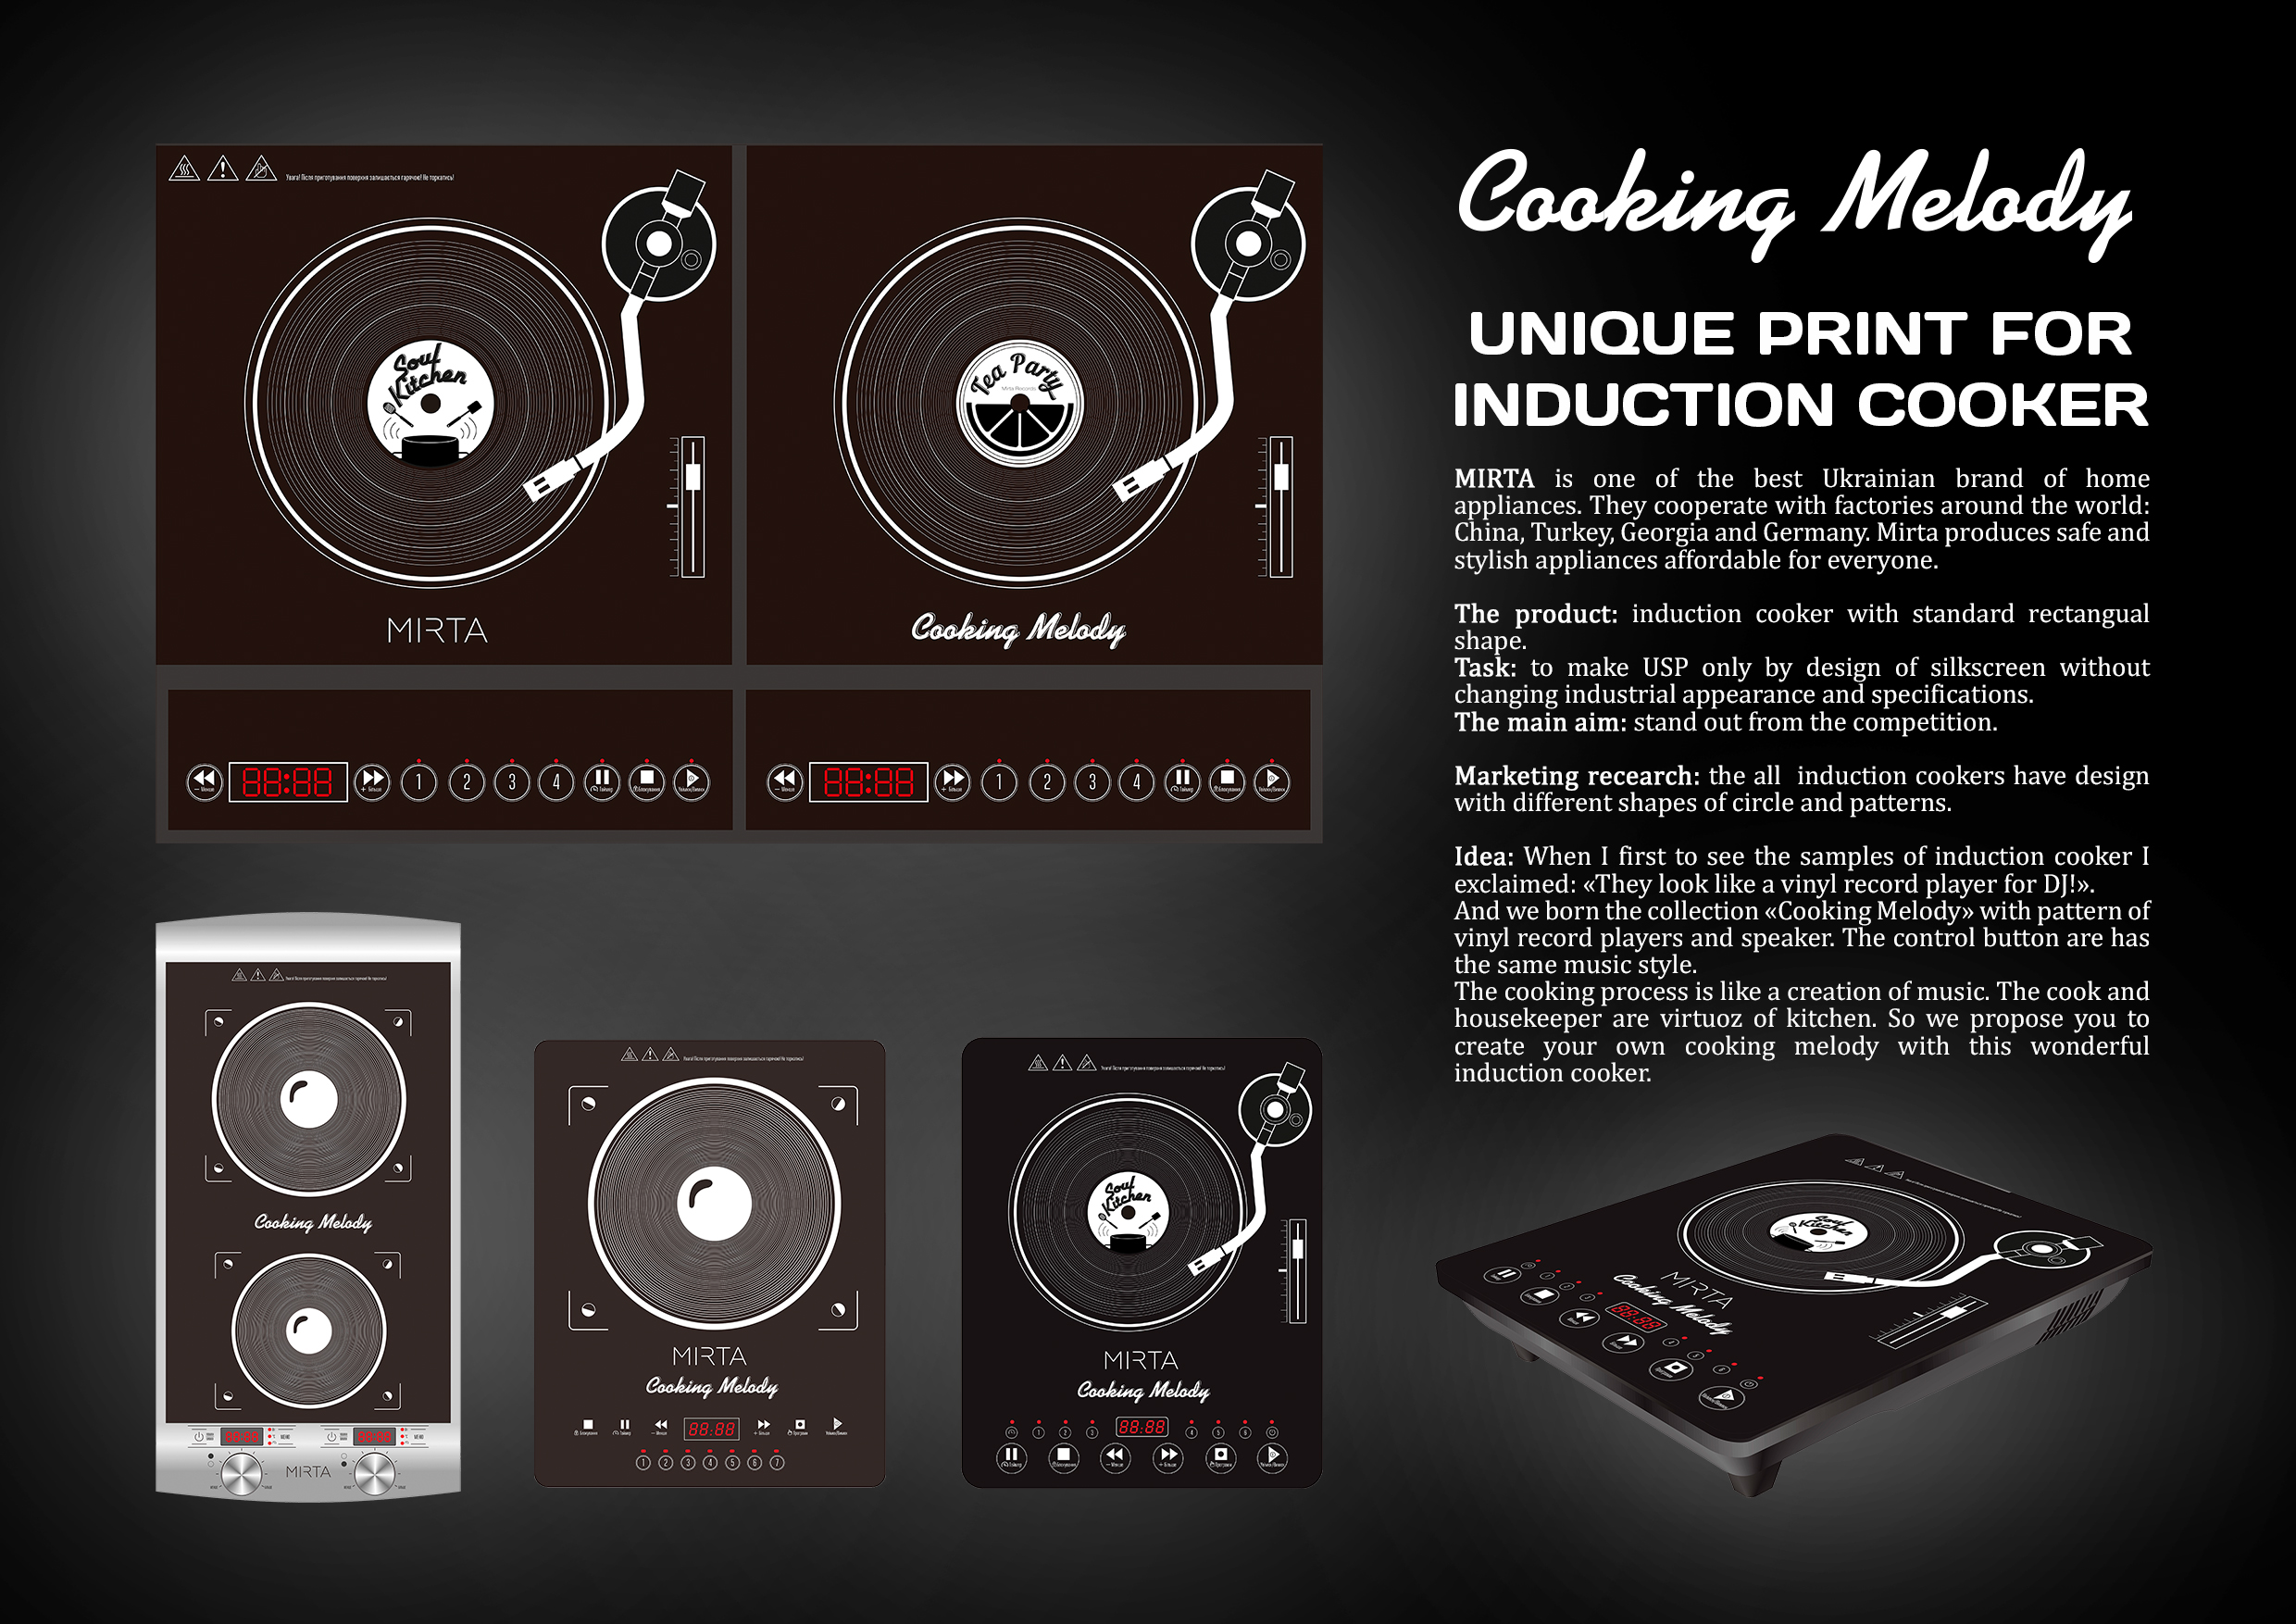 Cooking Melody: unique print for induction cooker